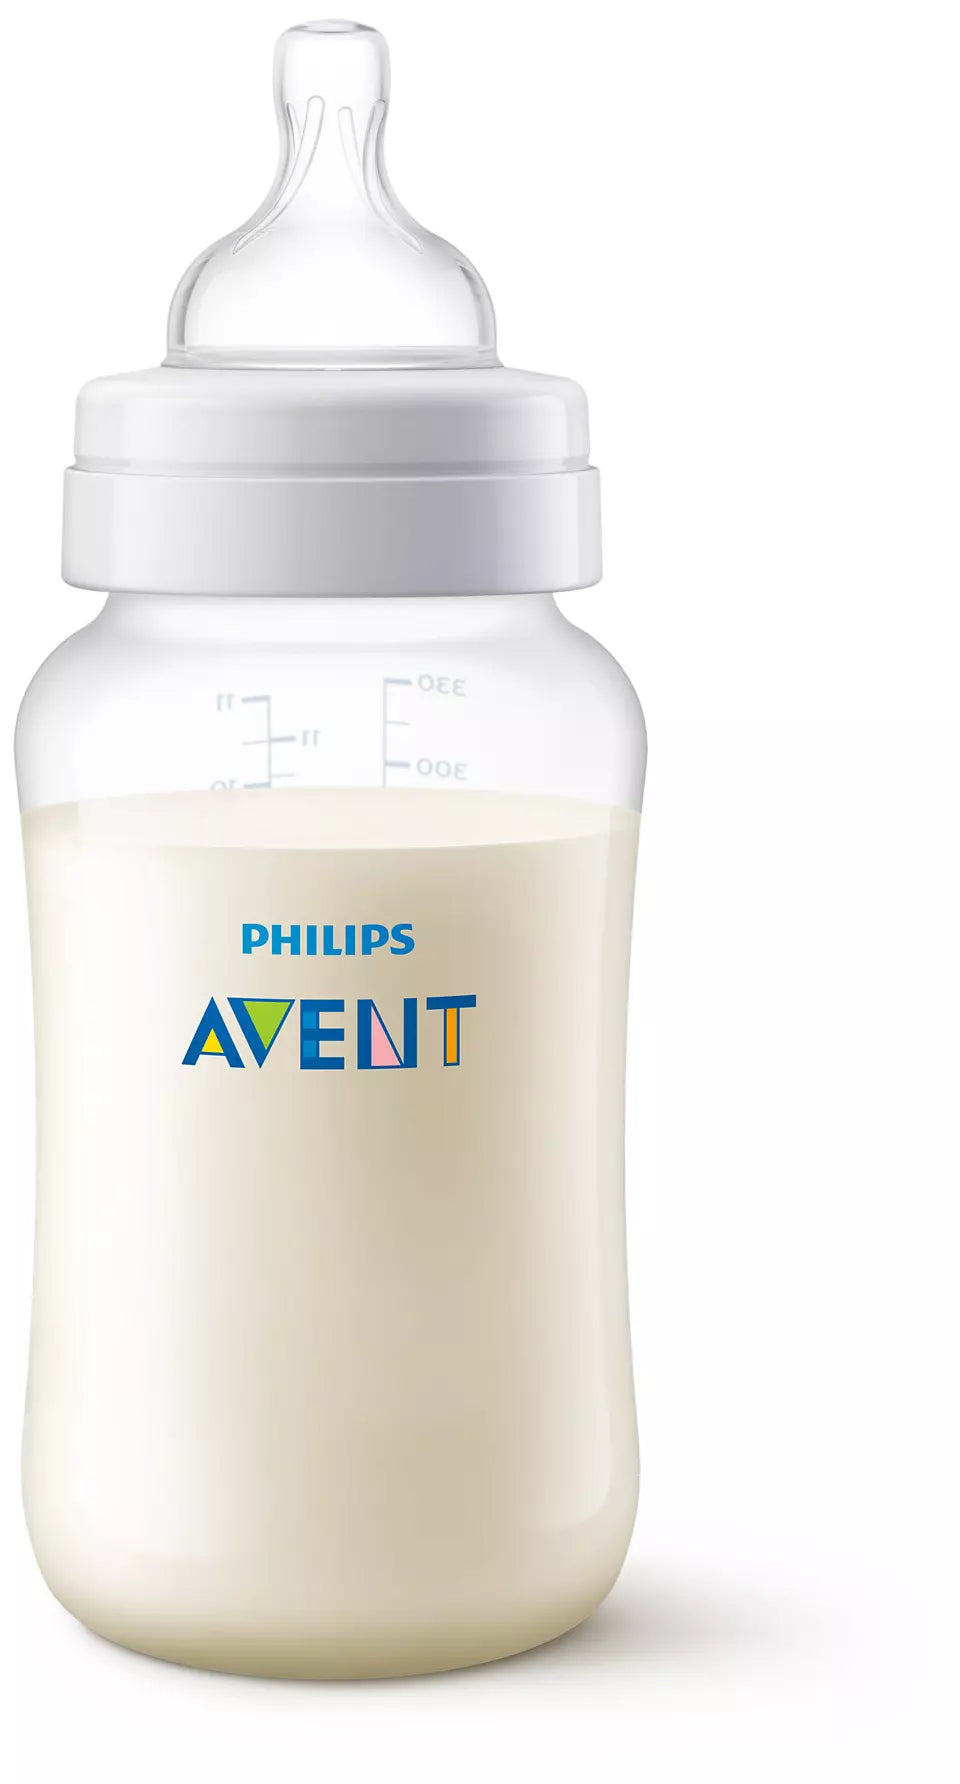 Anti-colic baby bottle 330 ml by Avent